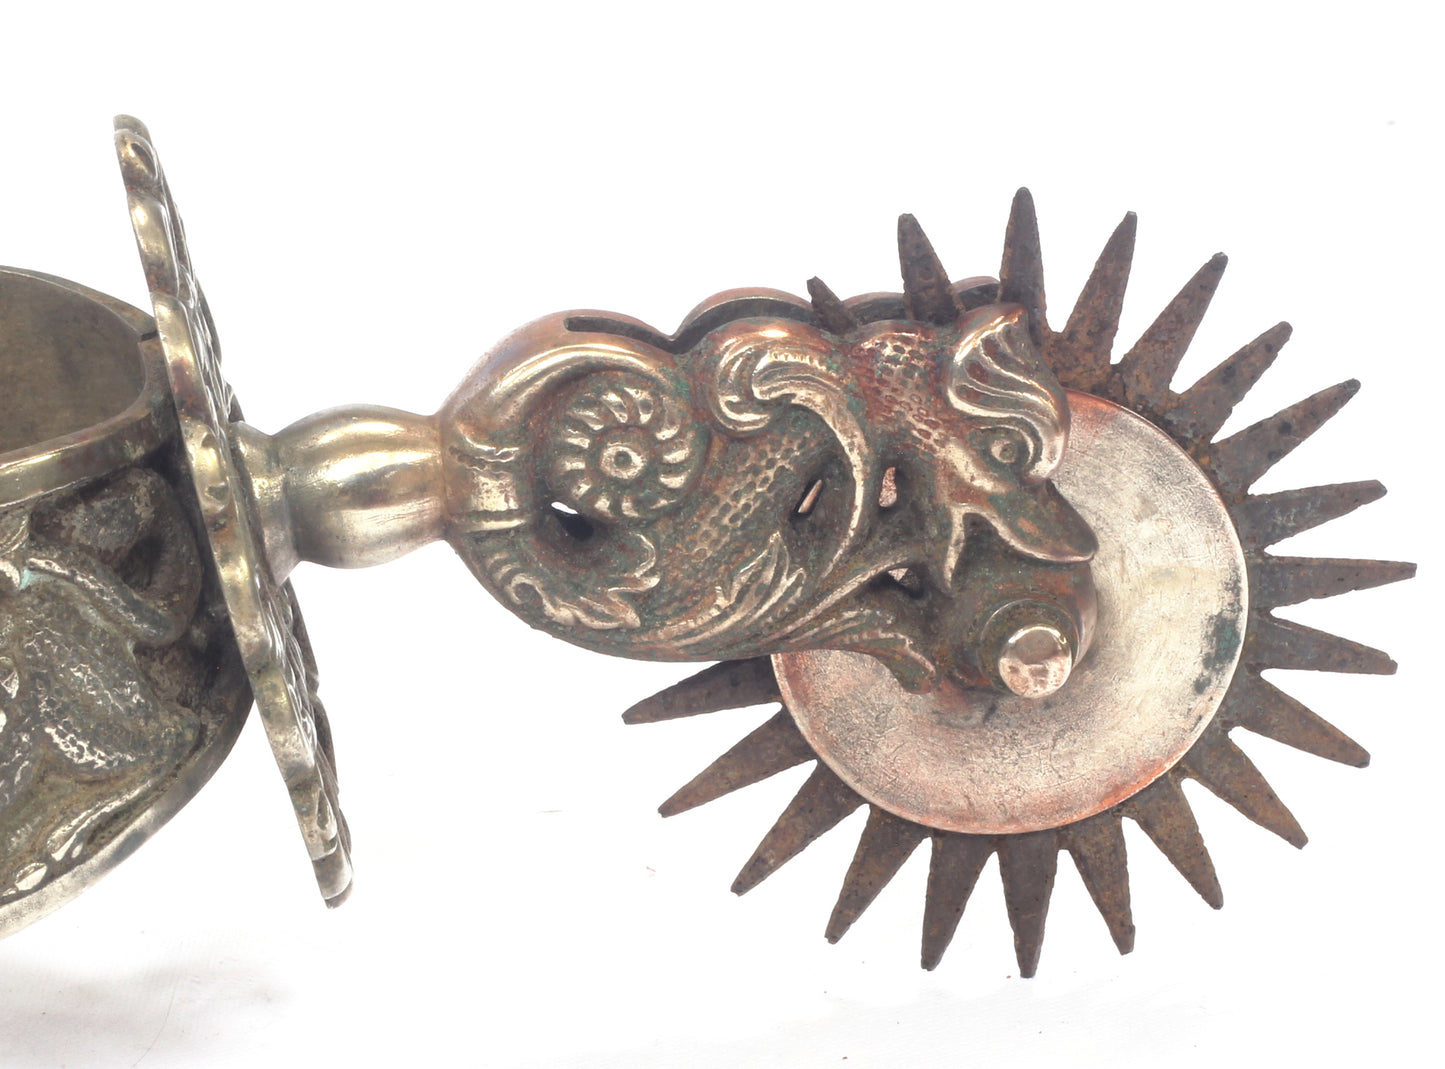 Pair of Gaucho Spurs Decorated with Dragons